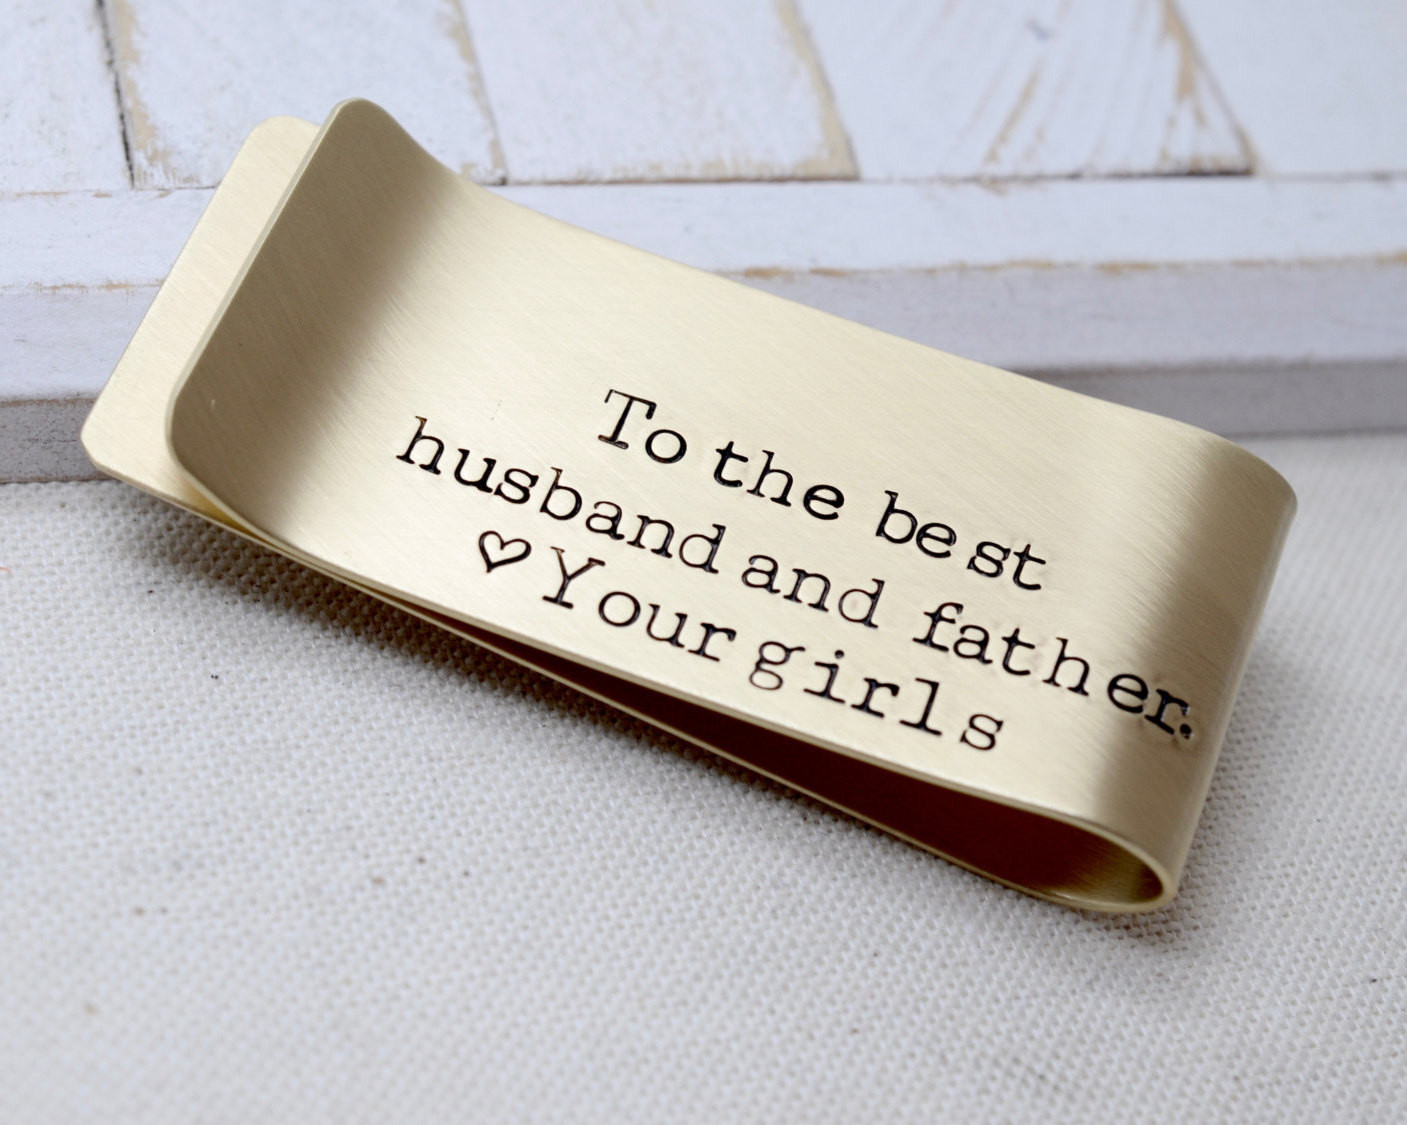 Fathers Day Gift For Husband
 Best Husband Best Father Personalized Money Clip Father